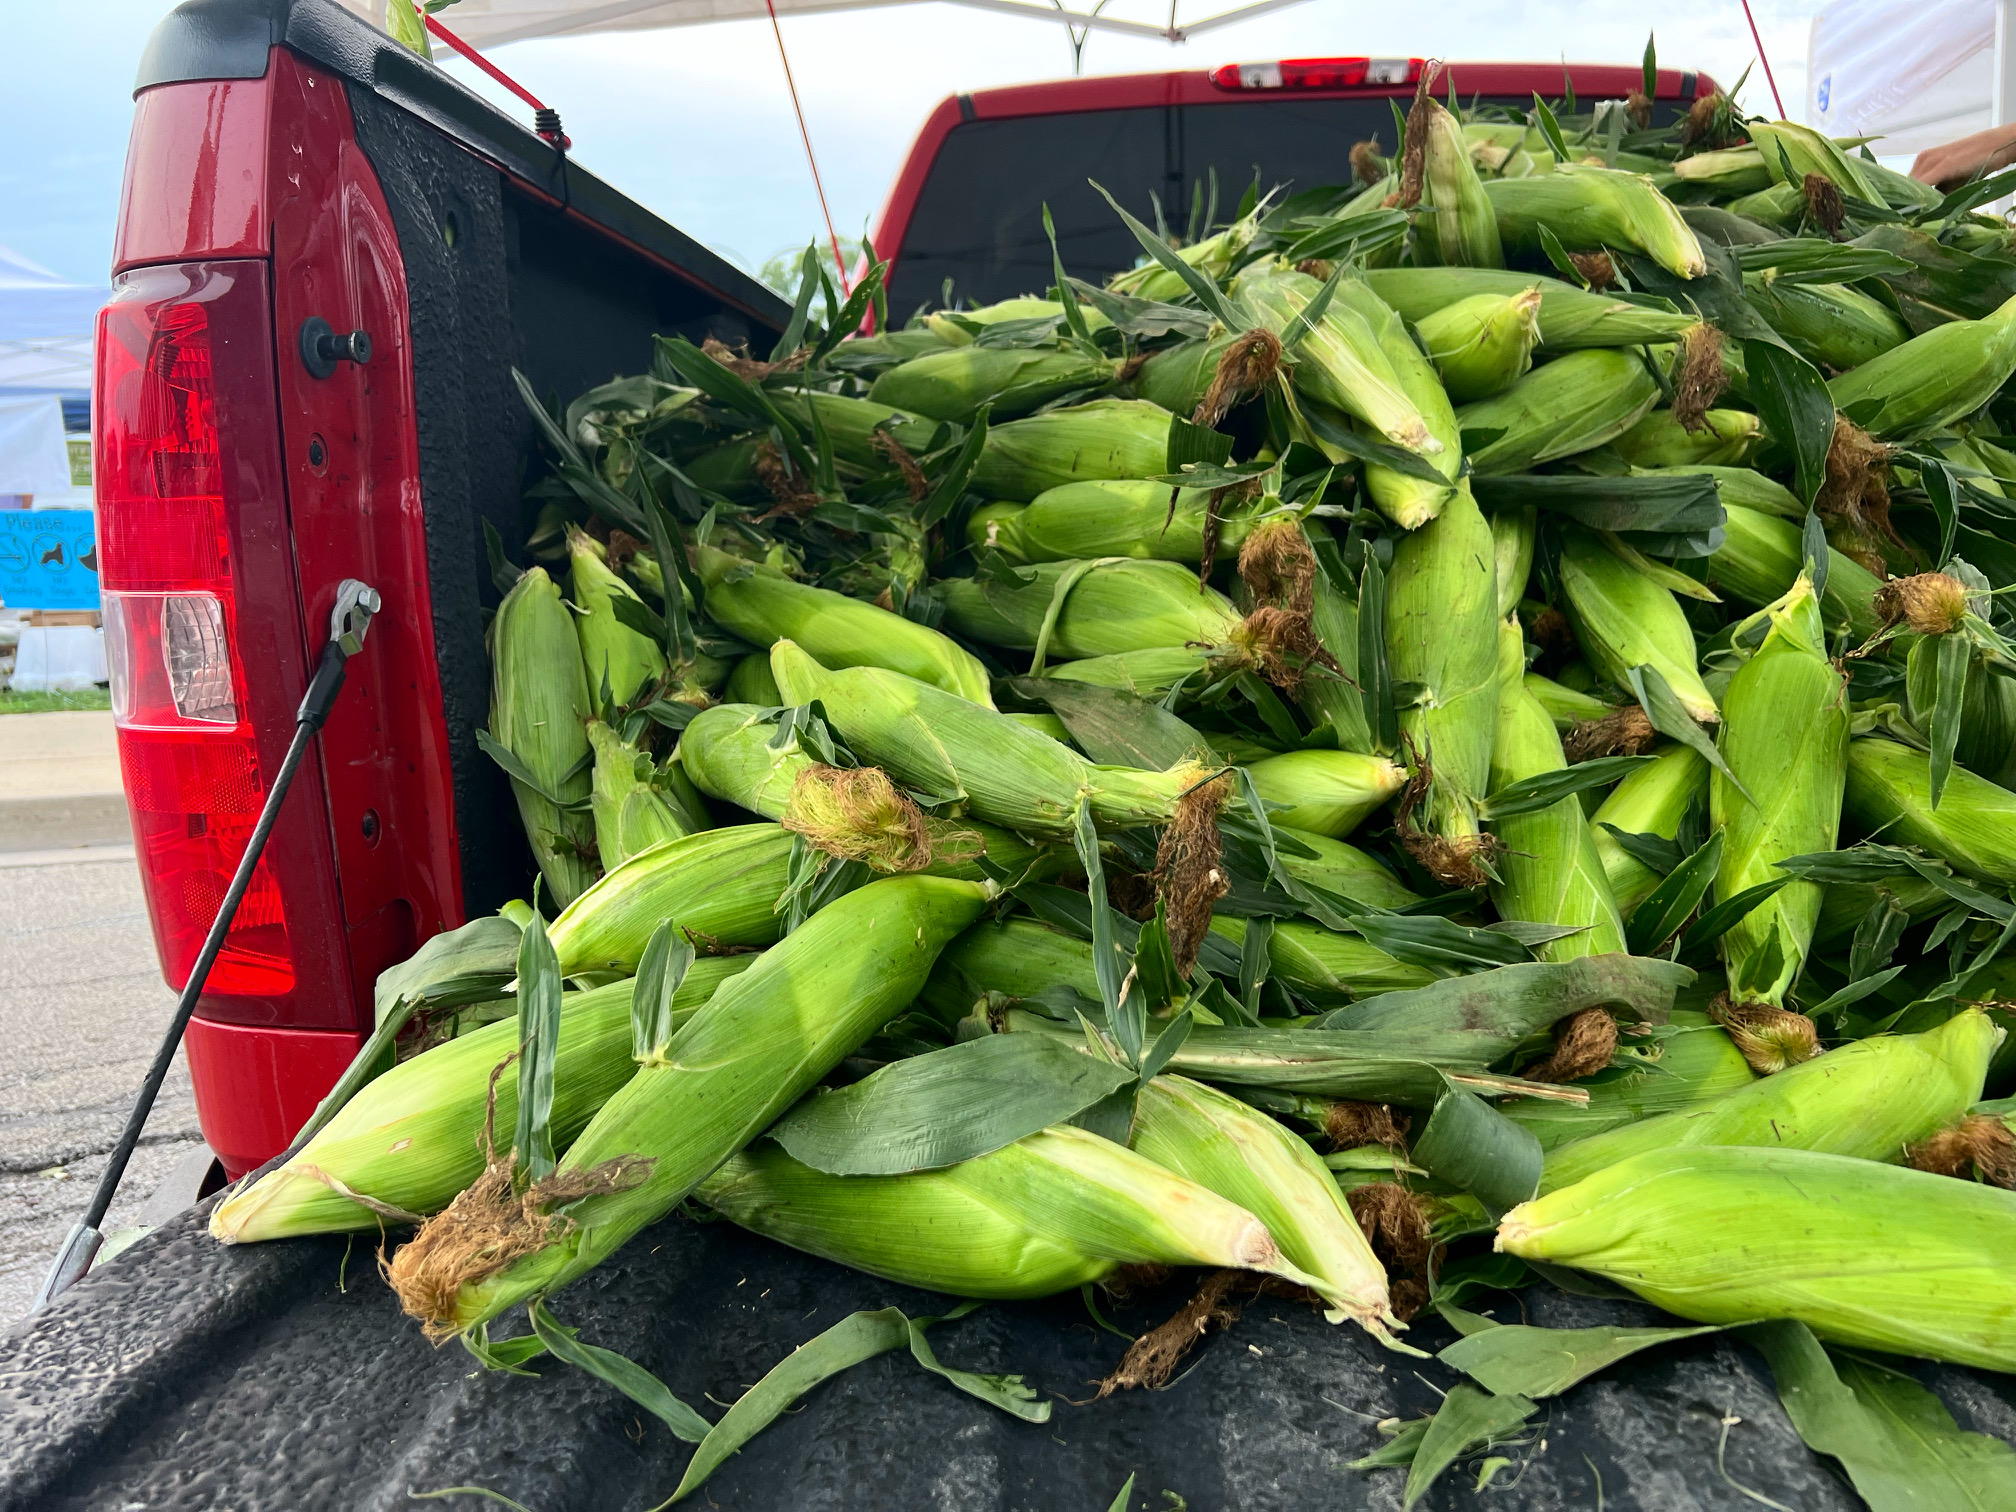 In the bed of a red truck, there is an abundance of unshucked corn for sale by Tegeler Sweet Corn at the Urbana Market at the Square. Photo by Alyssa Buckley.